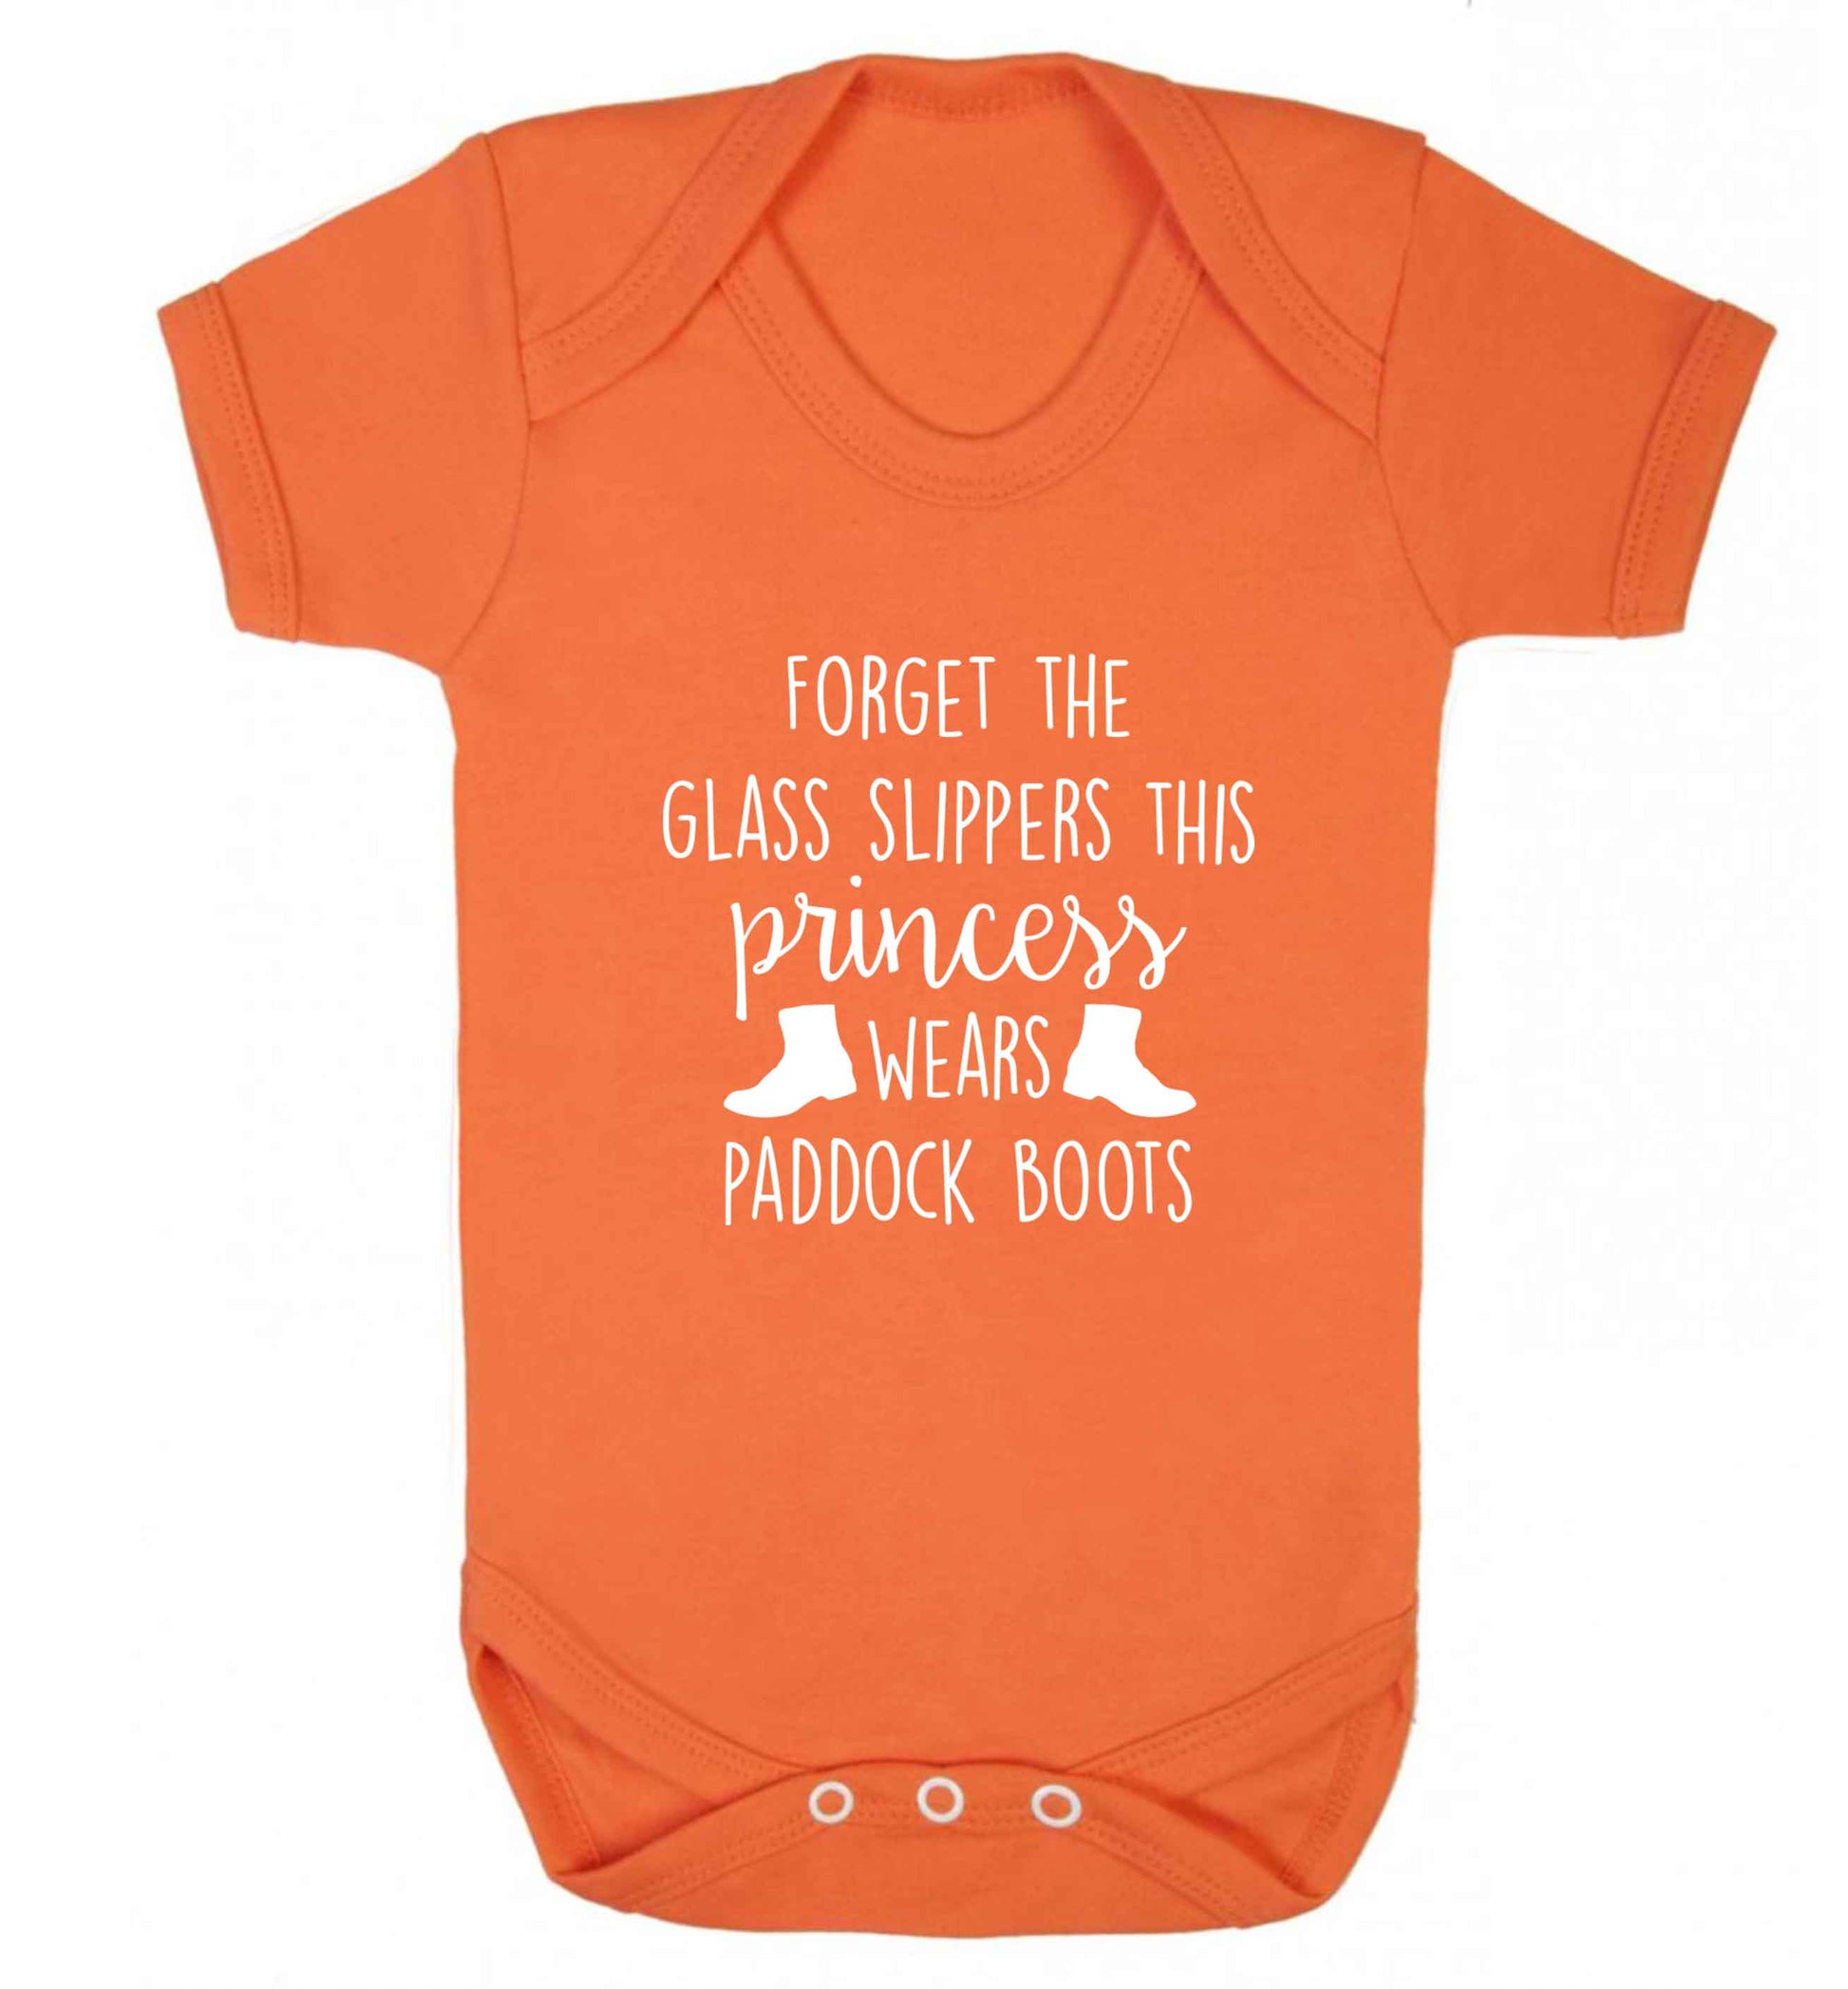 Forget the glass slippers this princess wears paddock boots baby vest orange 18-24 months